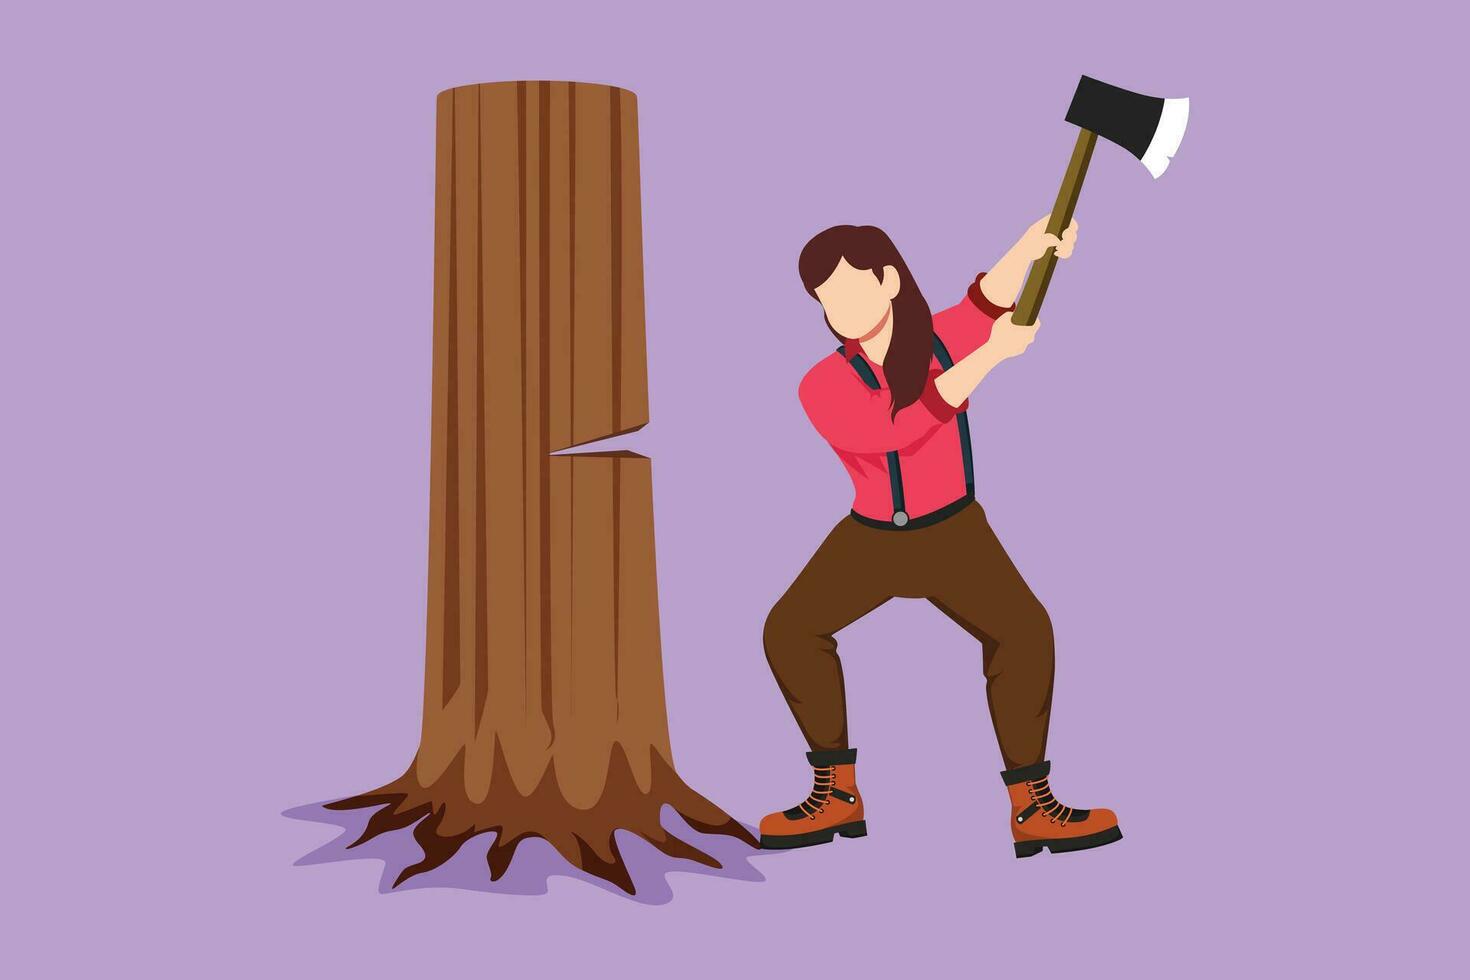 Graphic flat design drawing female lumberjack with an ax chopping wood. Woodcutter chopping tree with axe. Wearing shirt, jeans, boots. Pretty woman with ax cut tree. Cartoon style vector illustration